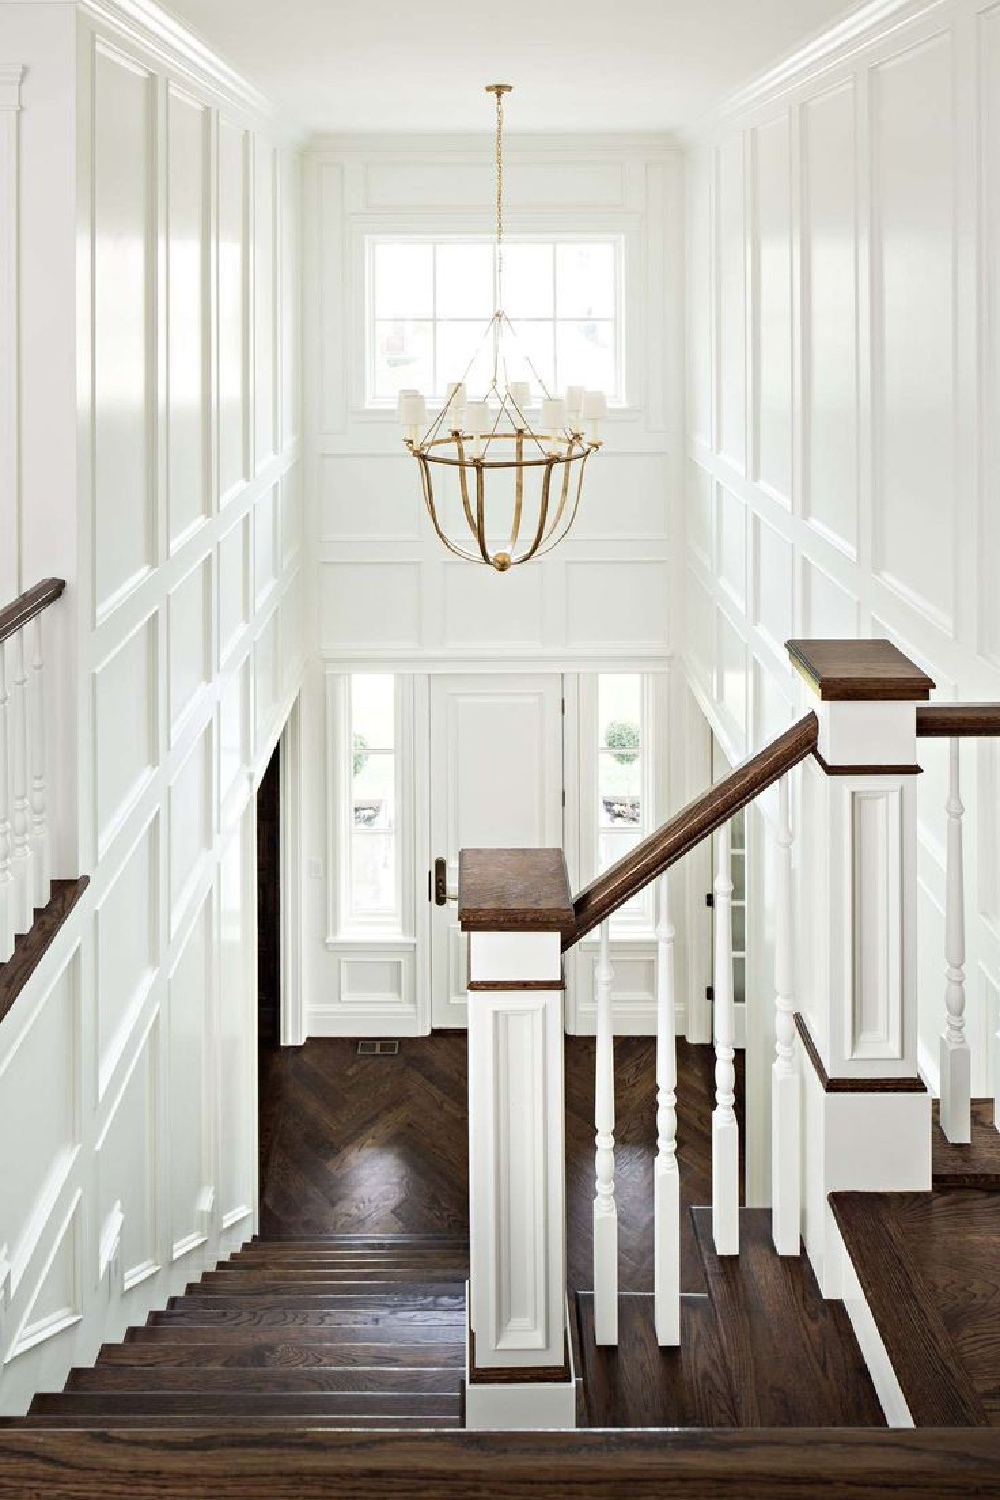 Richly stained dark hardwood flooring and crisp white formal white painted wood paneling in a magnificent entry and staircase. Design by The Fox Group. #staircase #entry #paneling #thefoxgroup